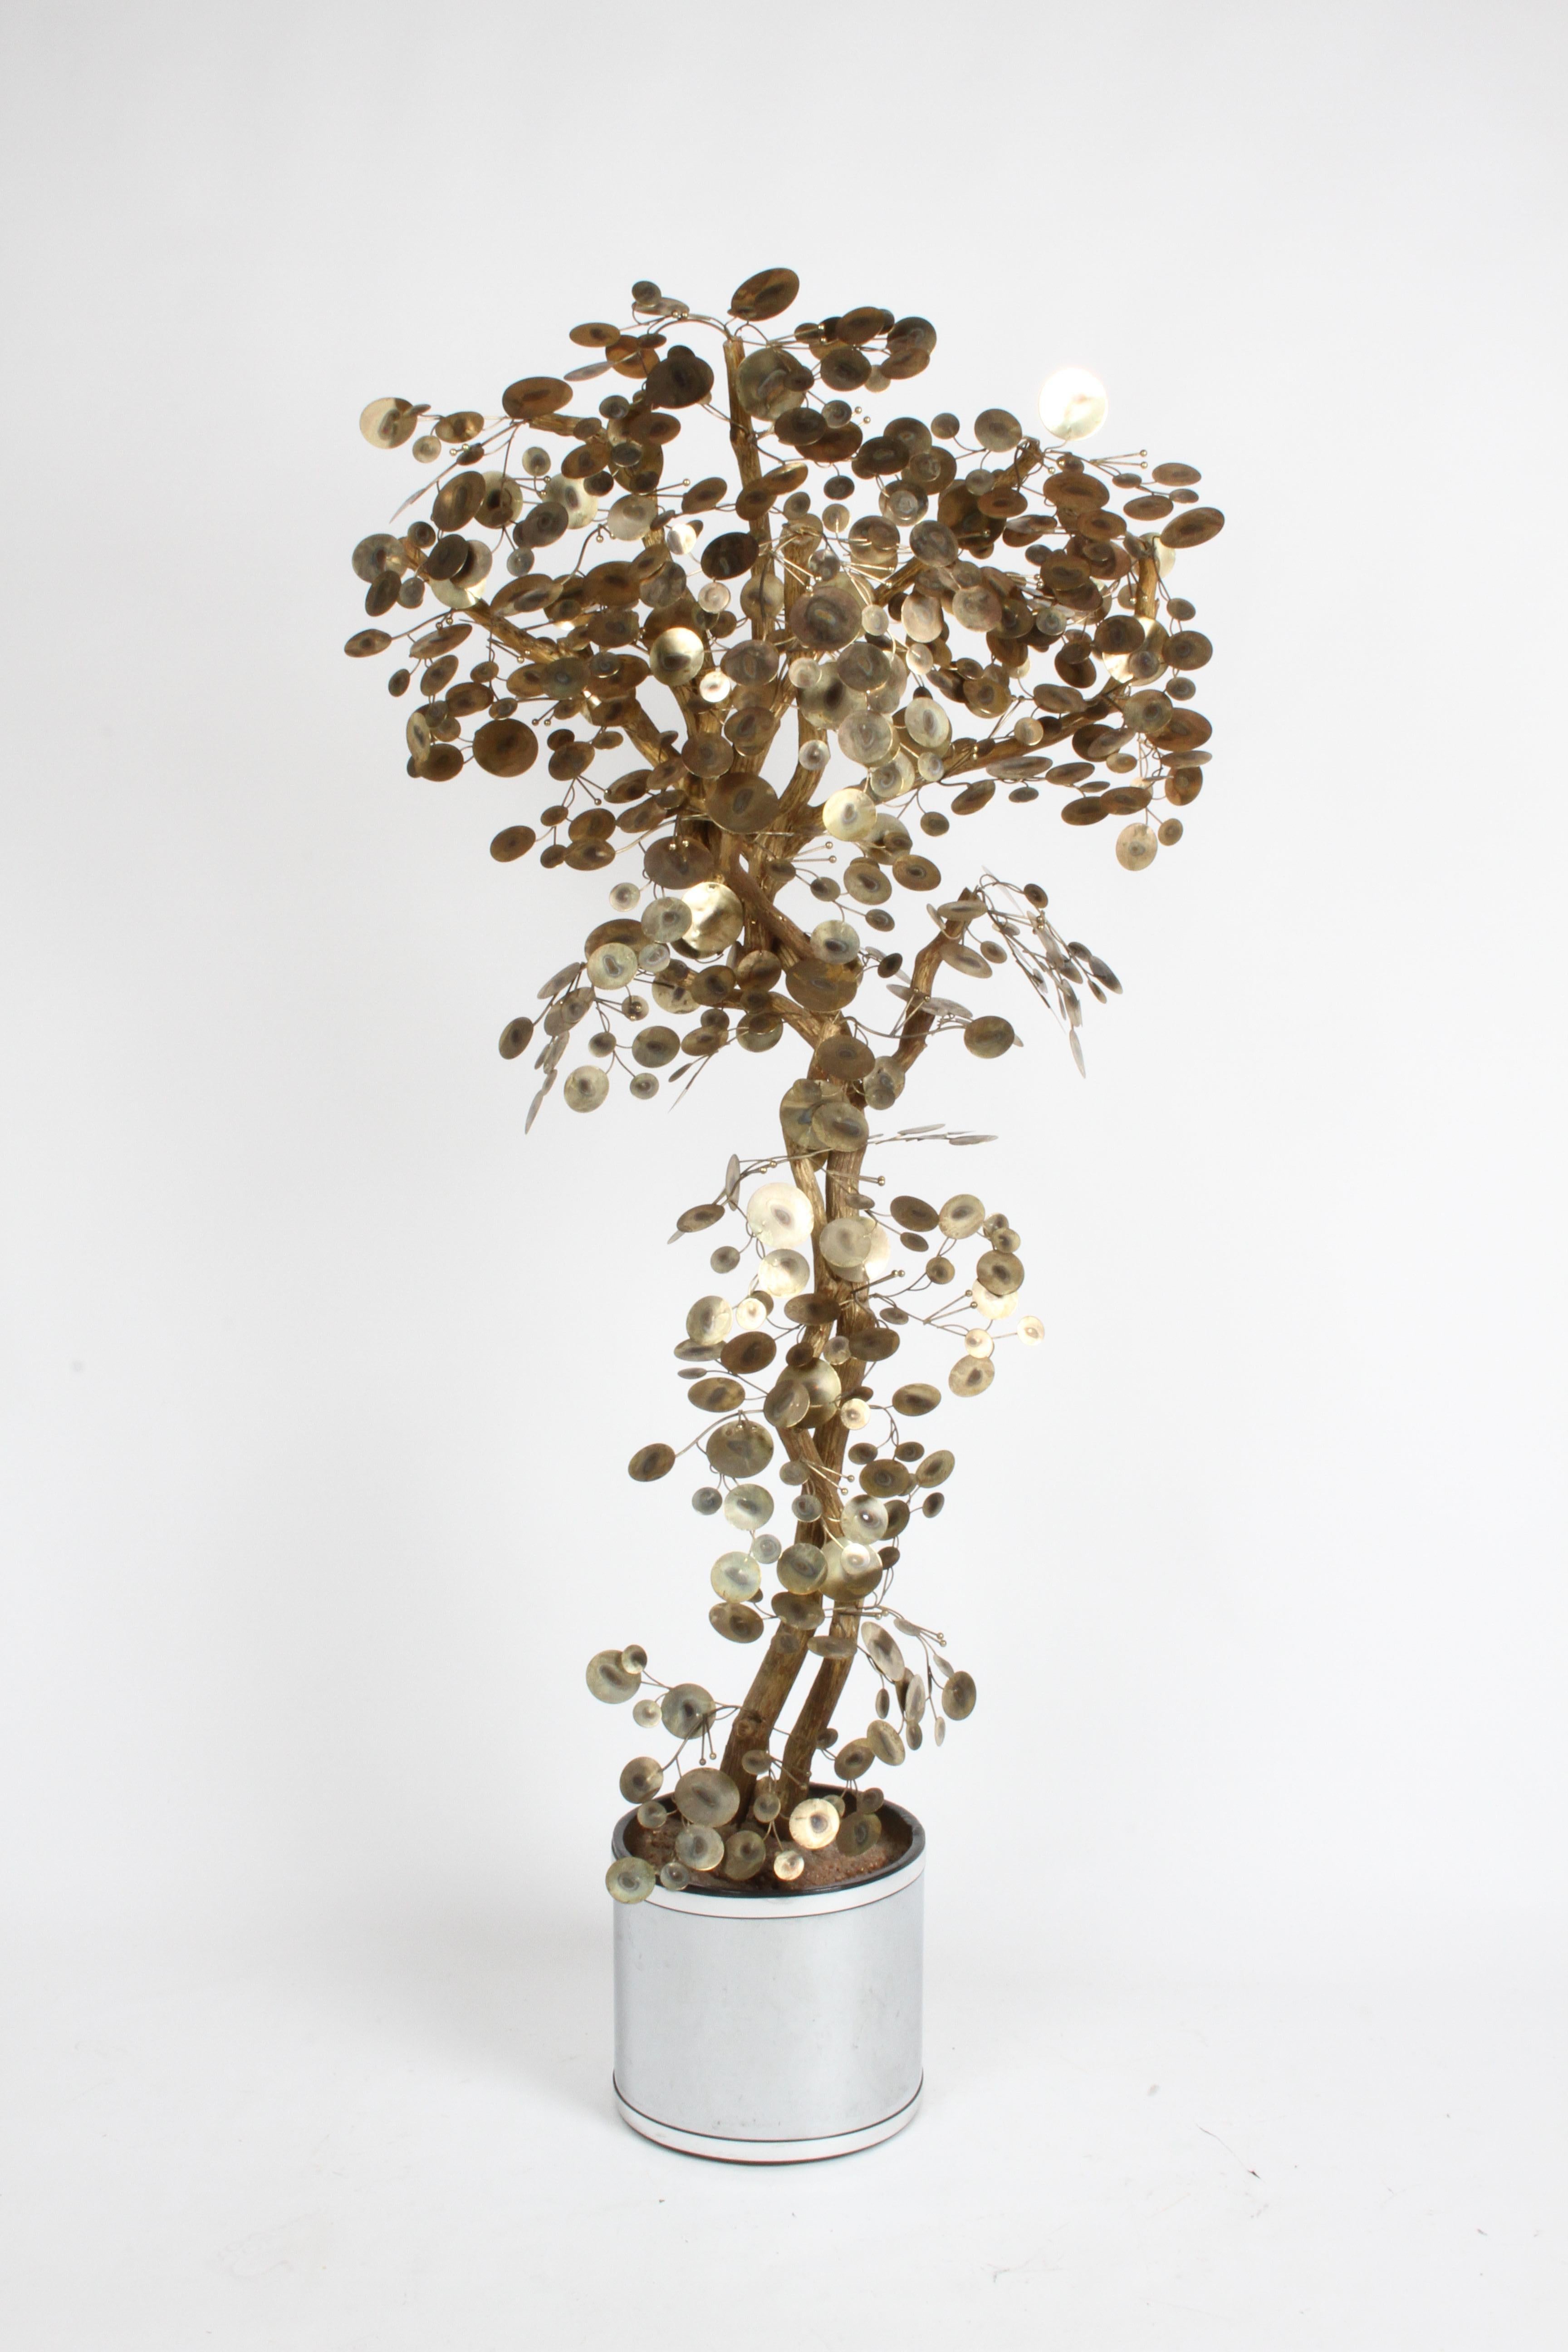 Vintage “Raindrops” tree sculpture by Curtis Jeré circa 1970s. This standing floor sculpture is constructed with natural tree branches, which have been painted gold, and decorated with elegant metal discs in a brass-plated finish that gives the form